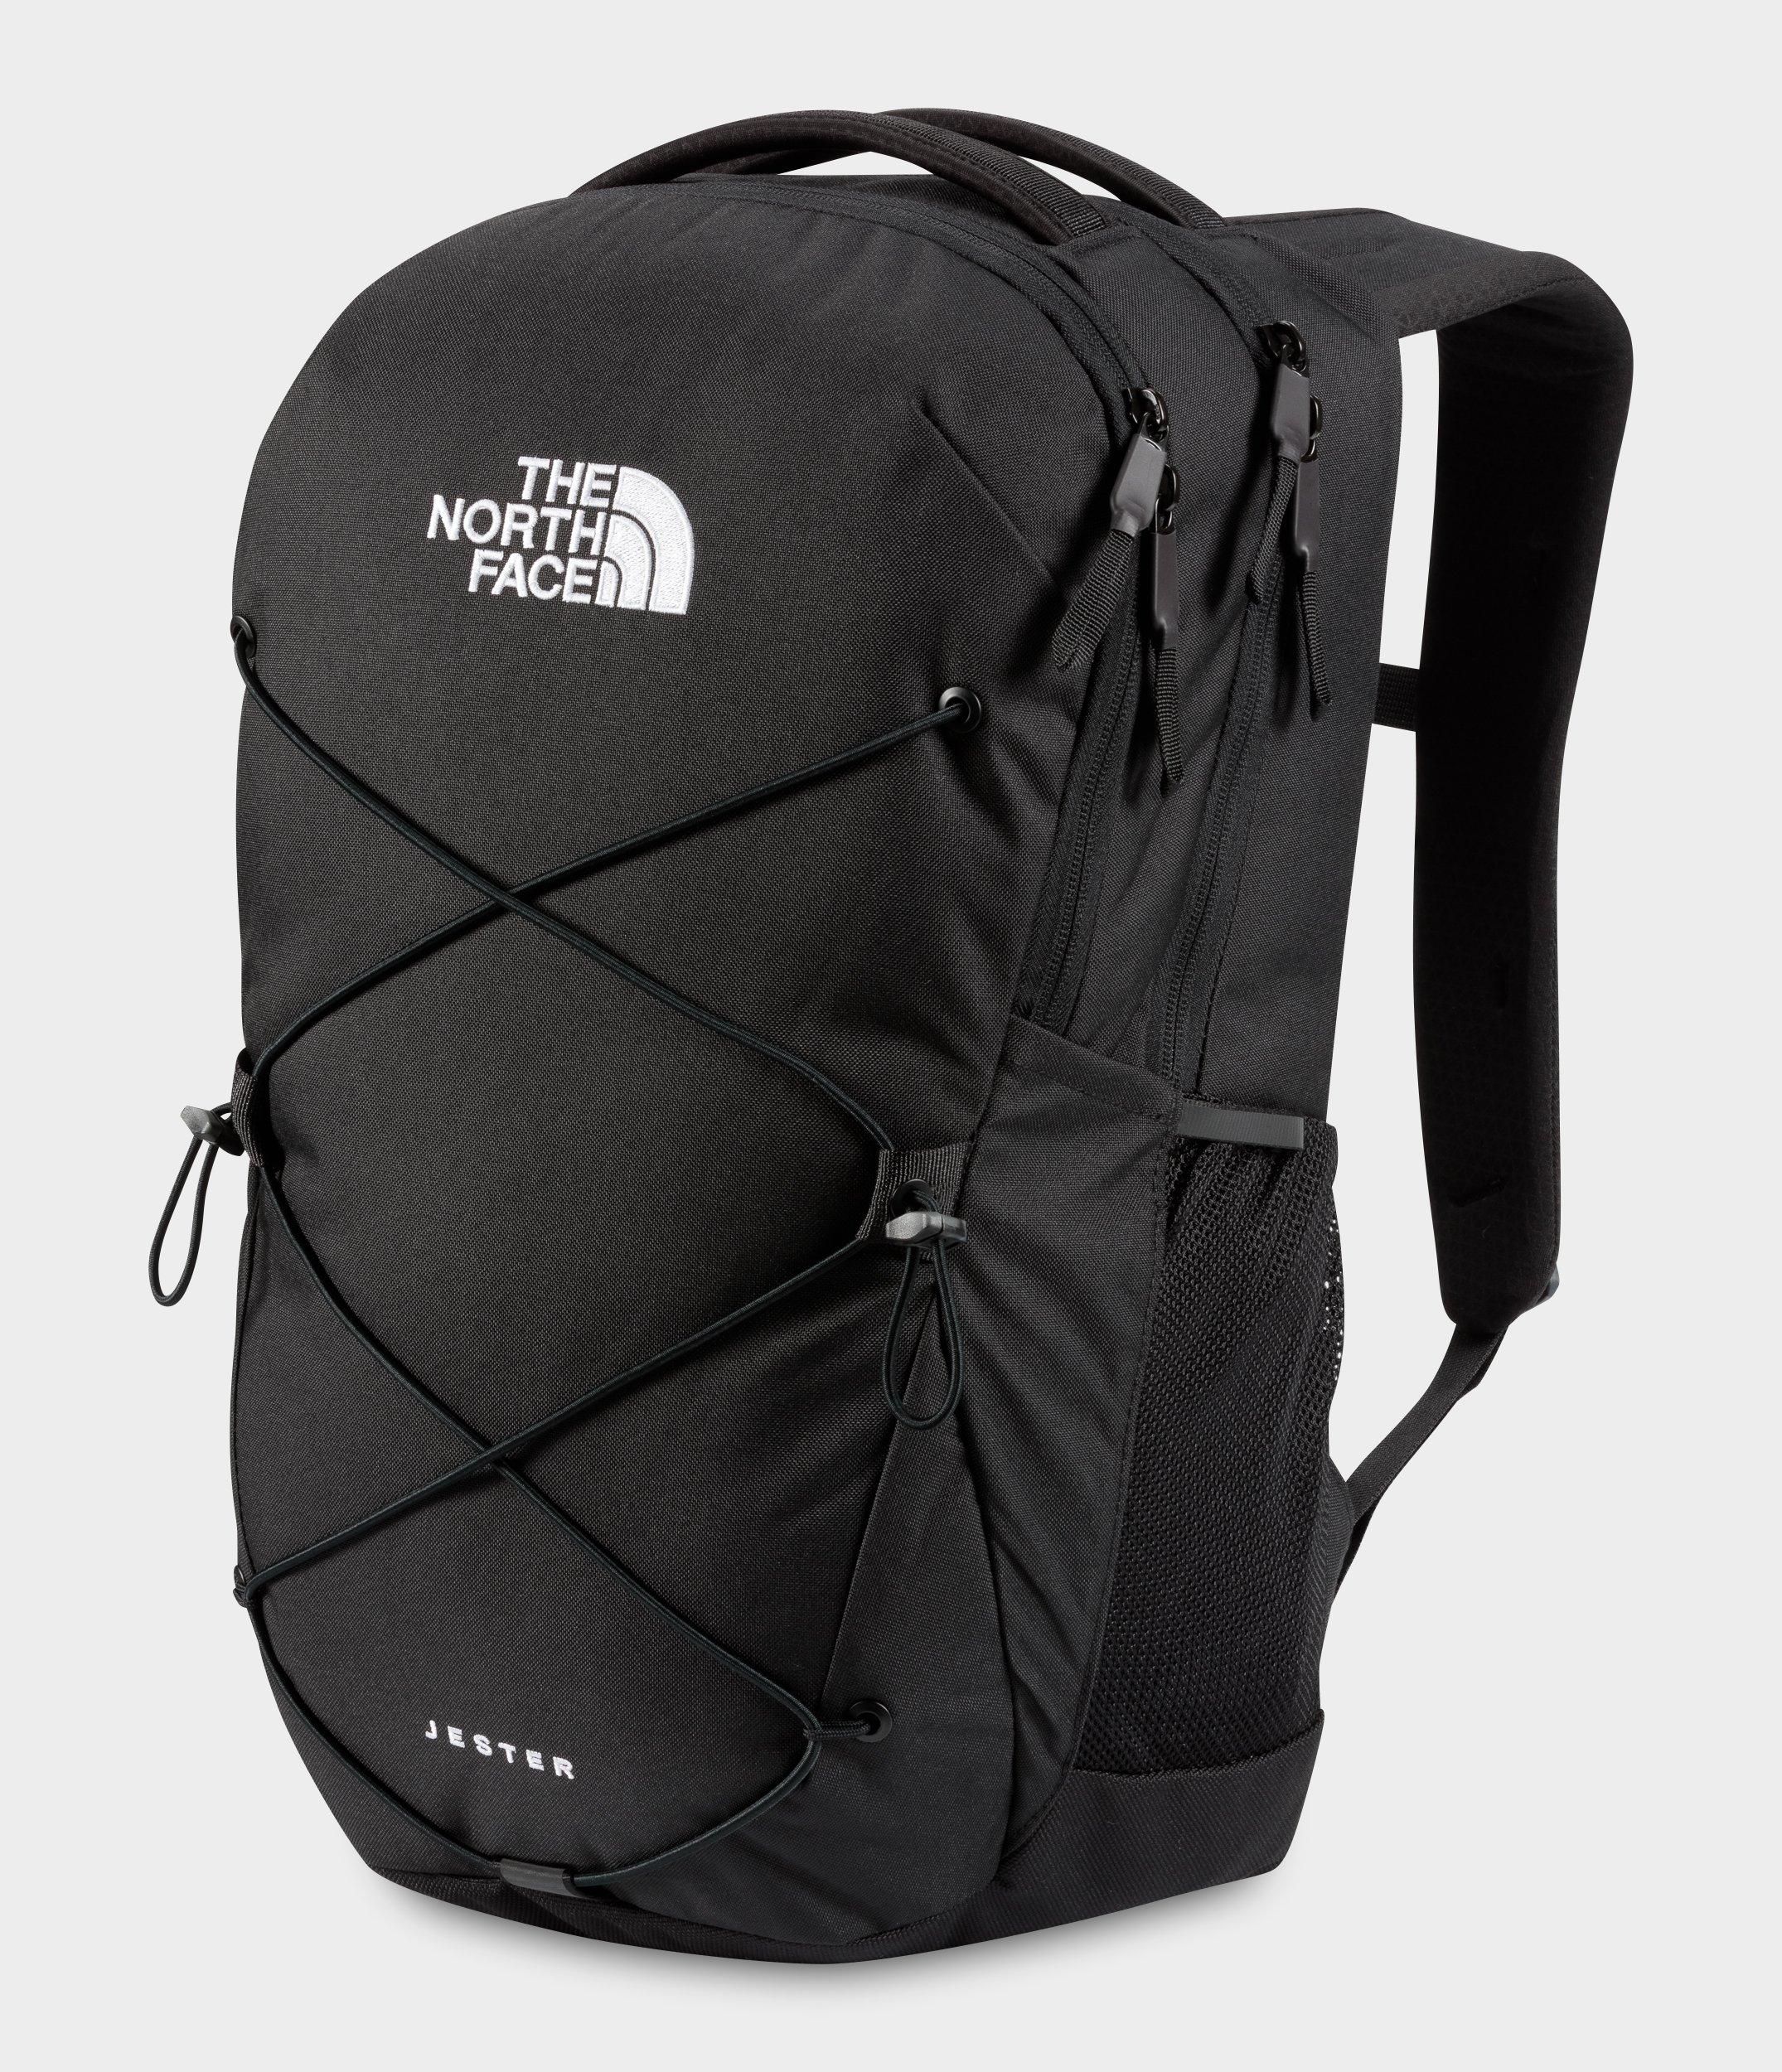 The North Face Jester Backpack-Black 